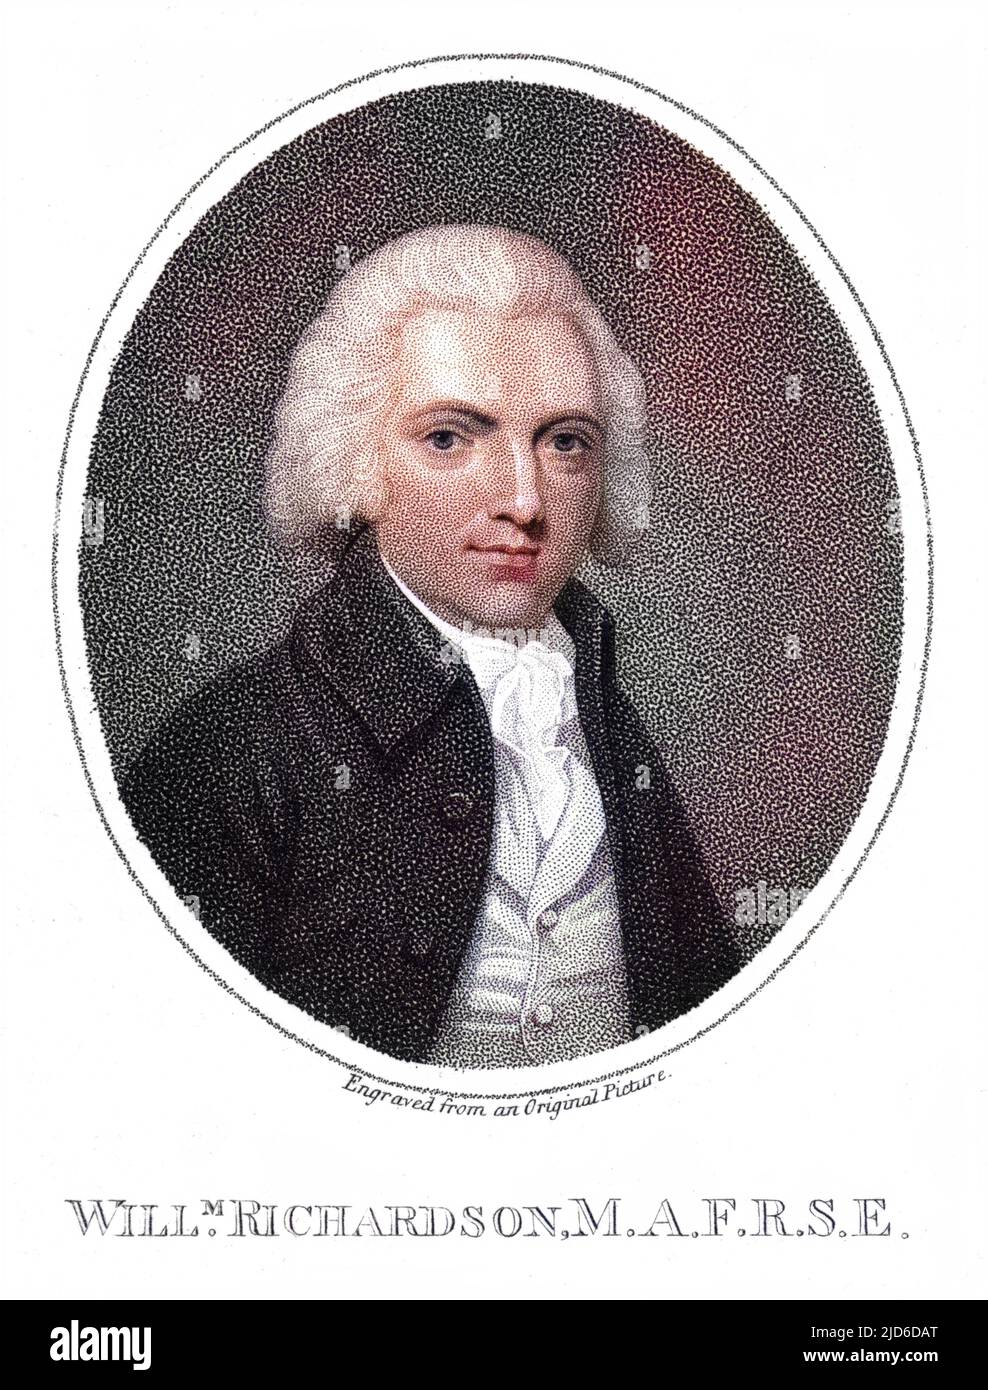 WILLIAM RICHARDSON scholar and writer Colourised version of : 10174135       Date: 1743 - 1814 Stock Photo